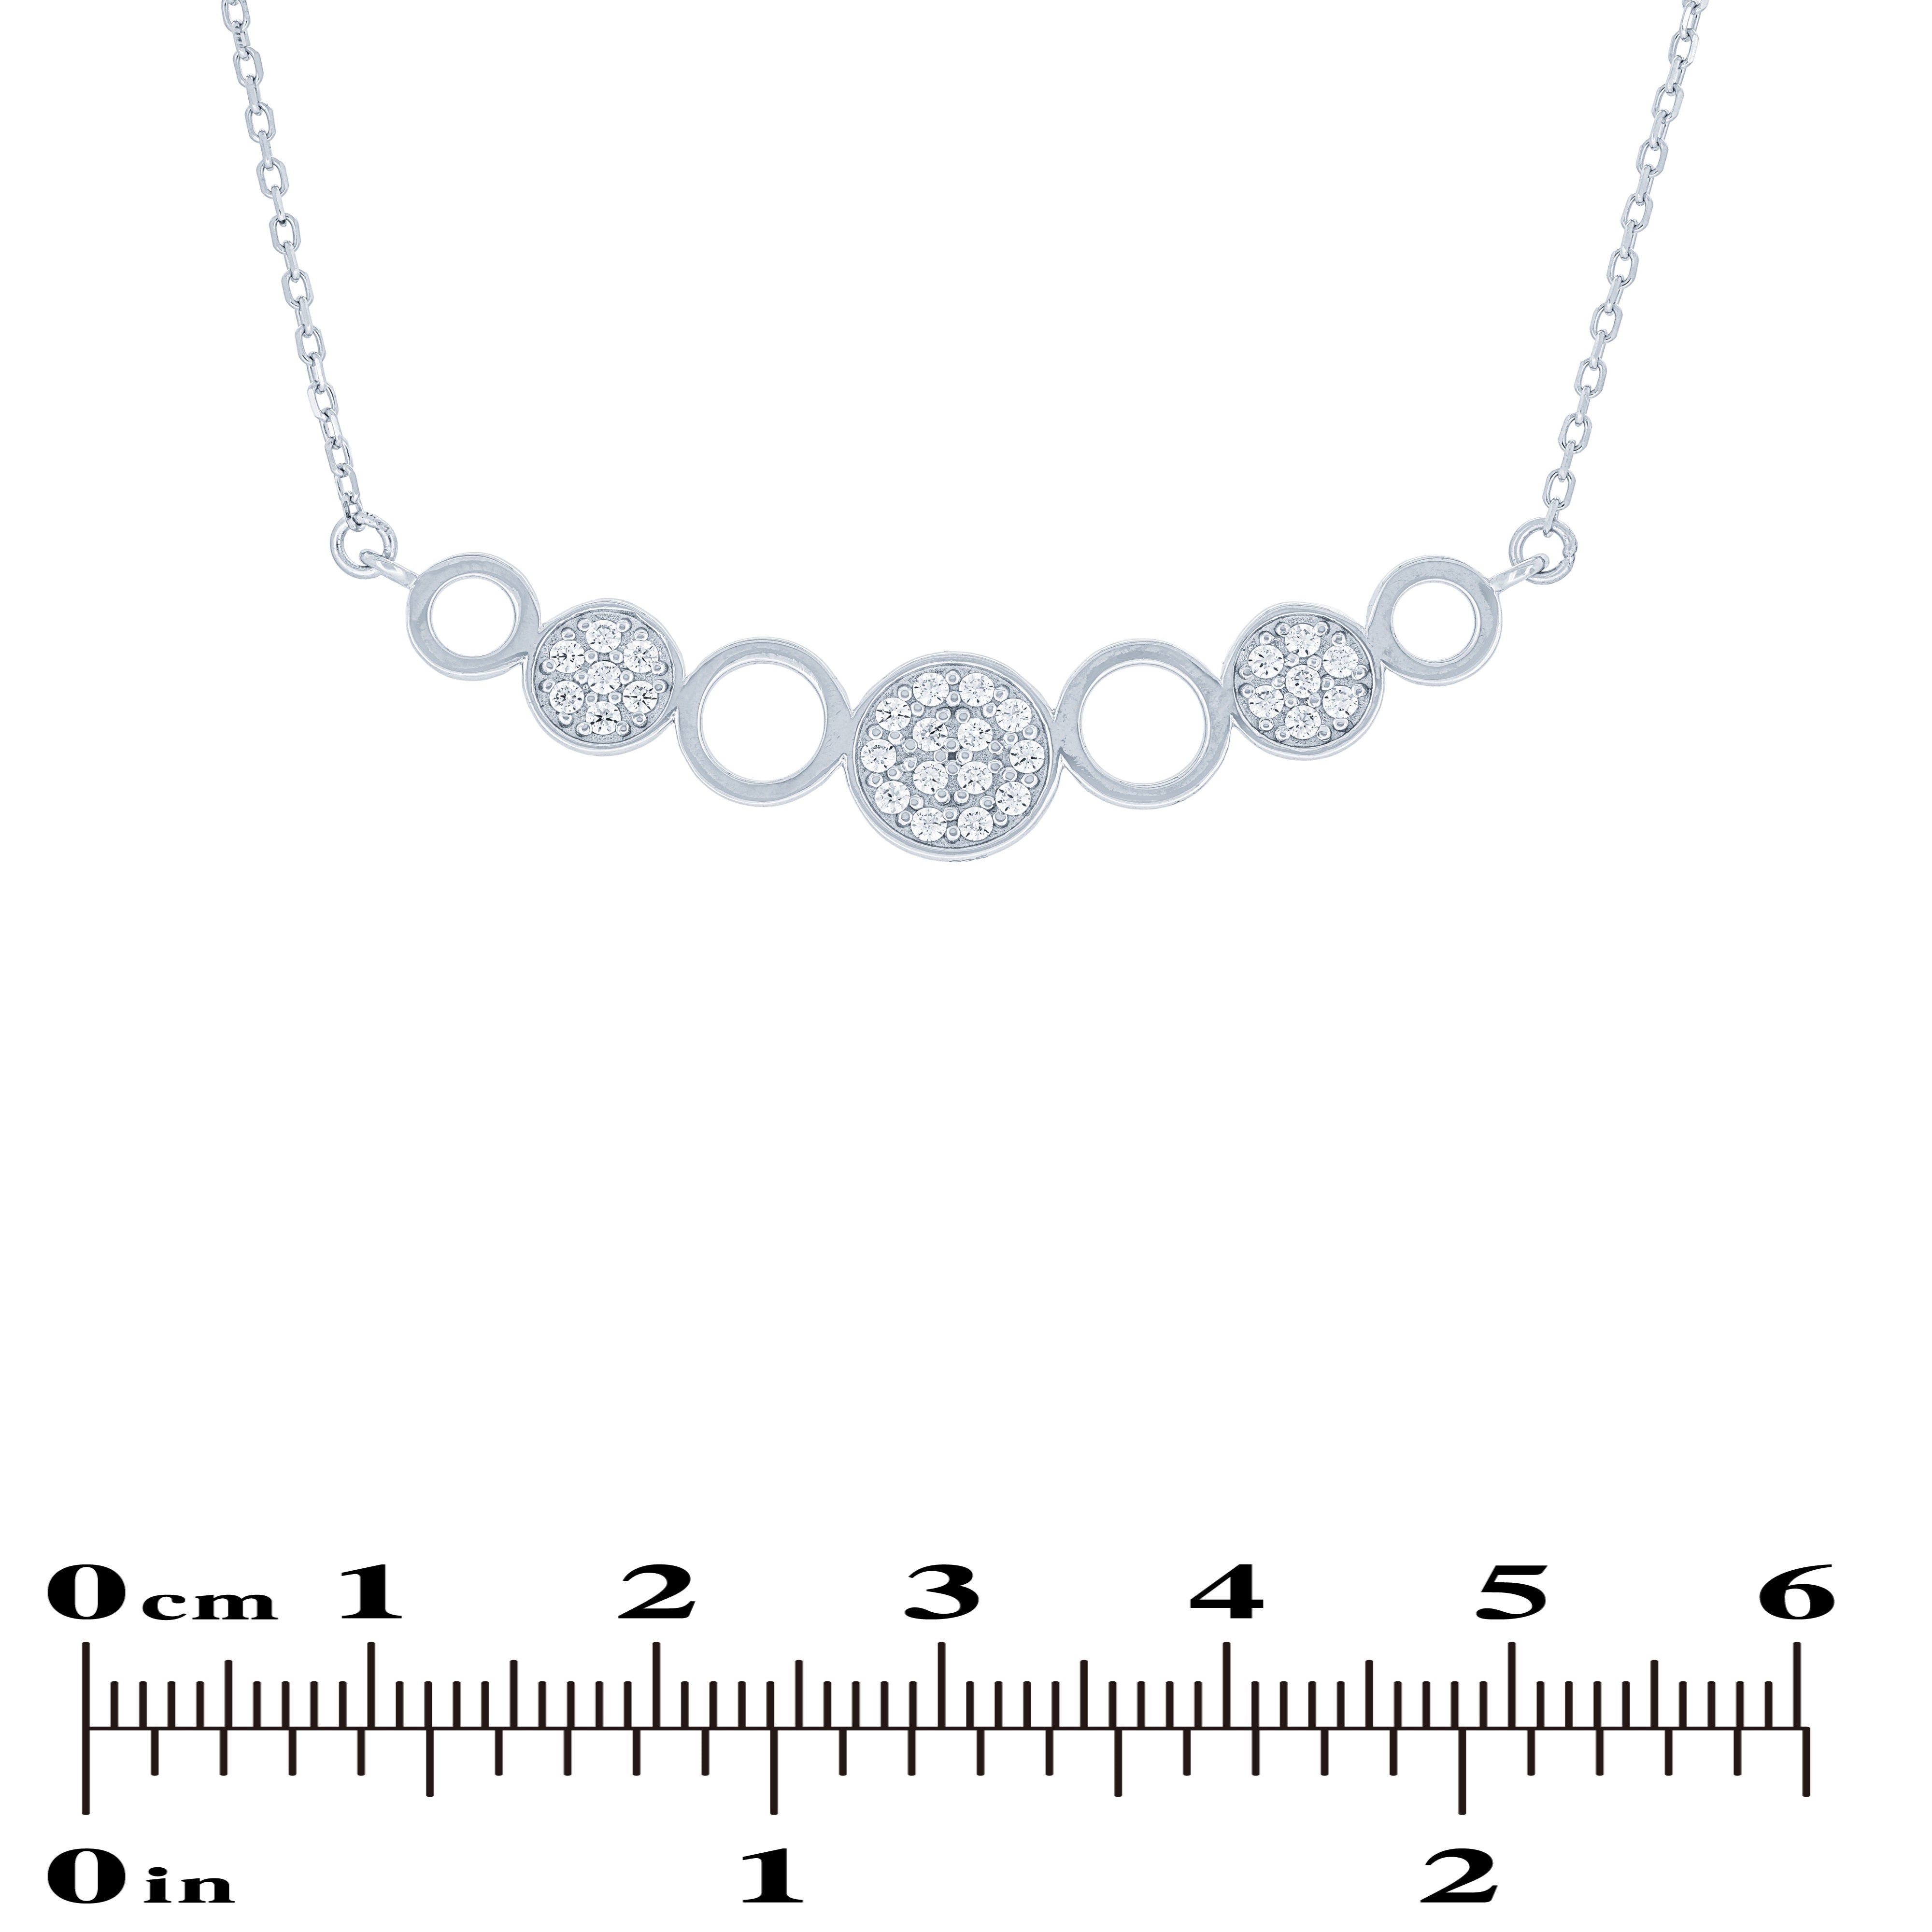 (100064) White Cubic Zirconia Necklace In Sterling Silver